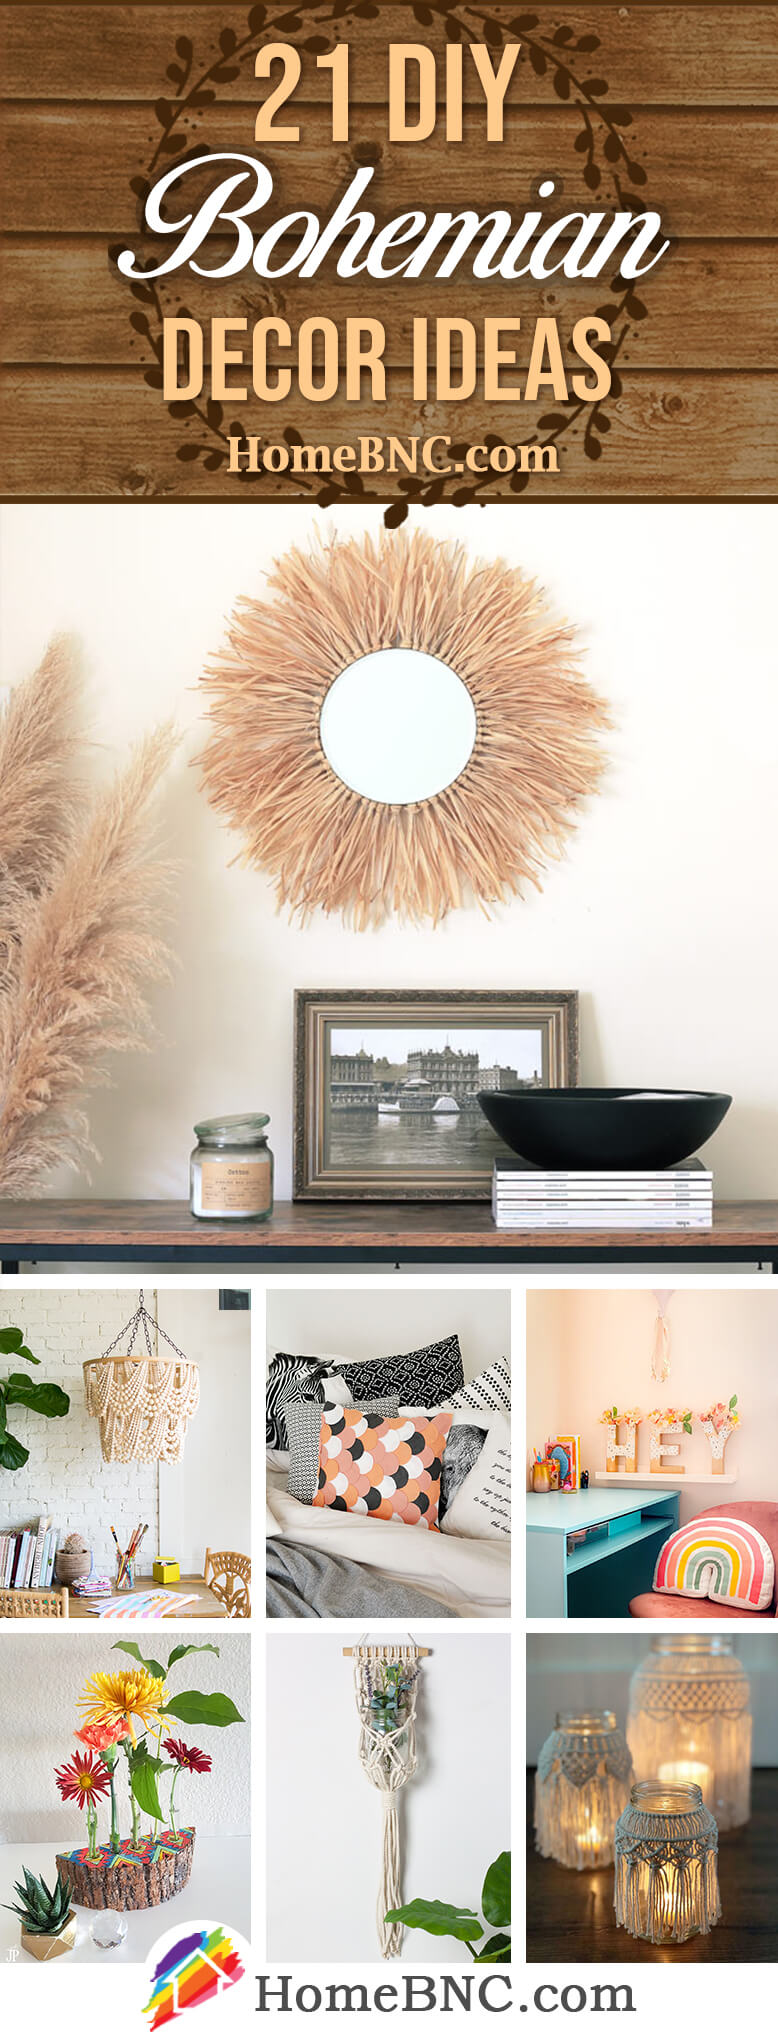 21 Best Diy Bohemian Decor Ideas You Can Easily Make Yourself In 2021